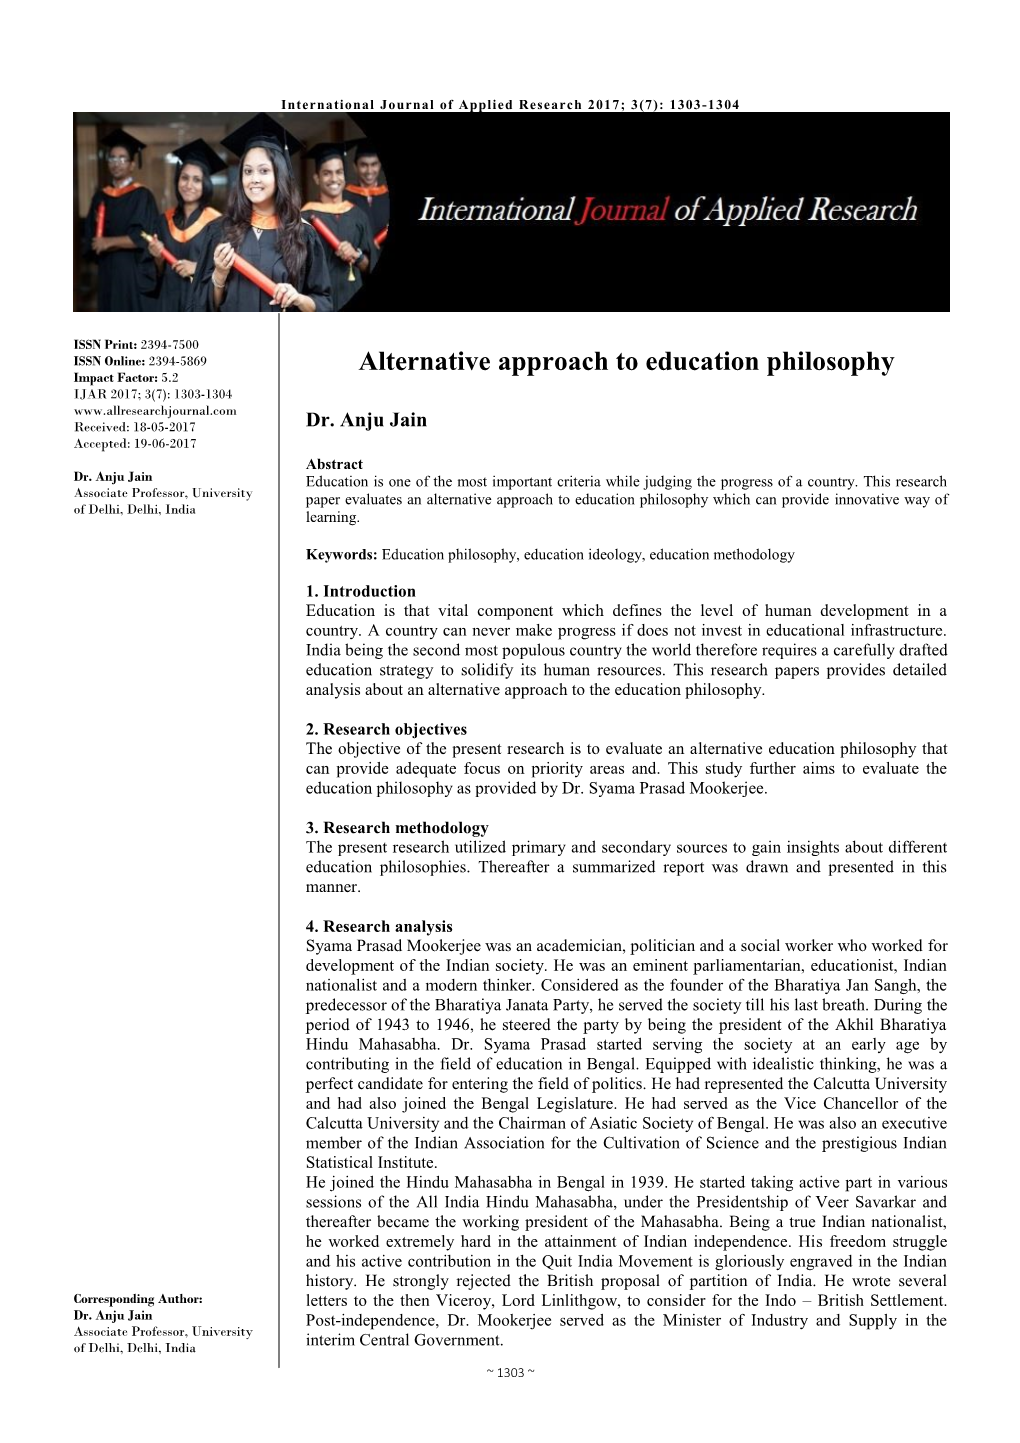 Alternative Approach to Education Philosophy Impact Factor: 5.2 IJAR 2017; 3(7): 1303-1304 Received: 18-05-2017 Dr